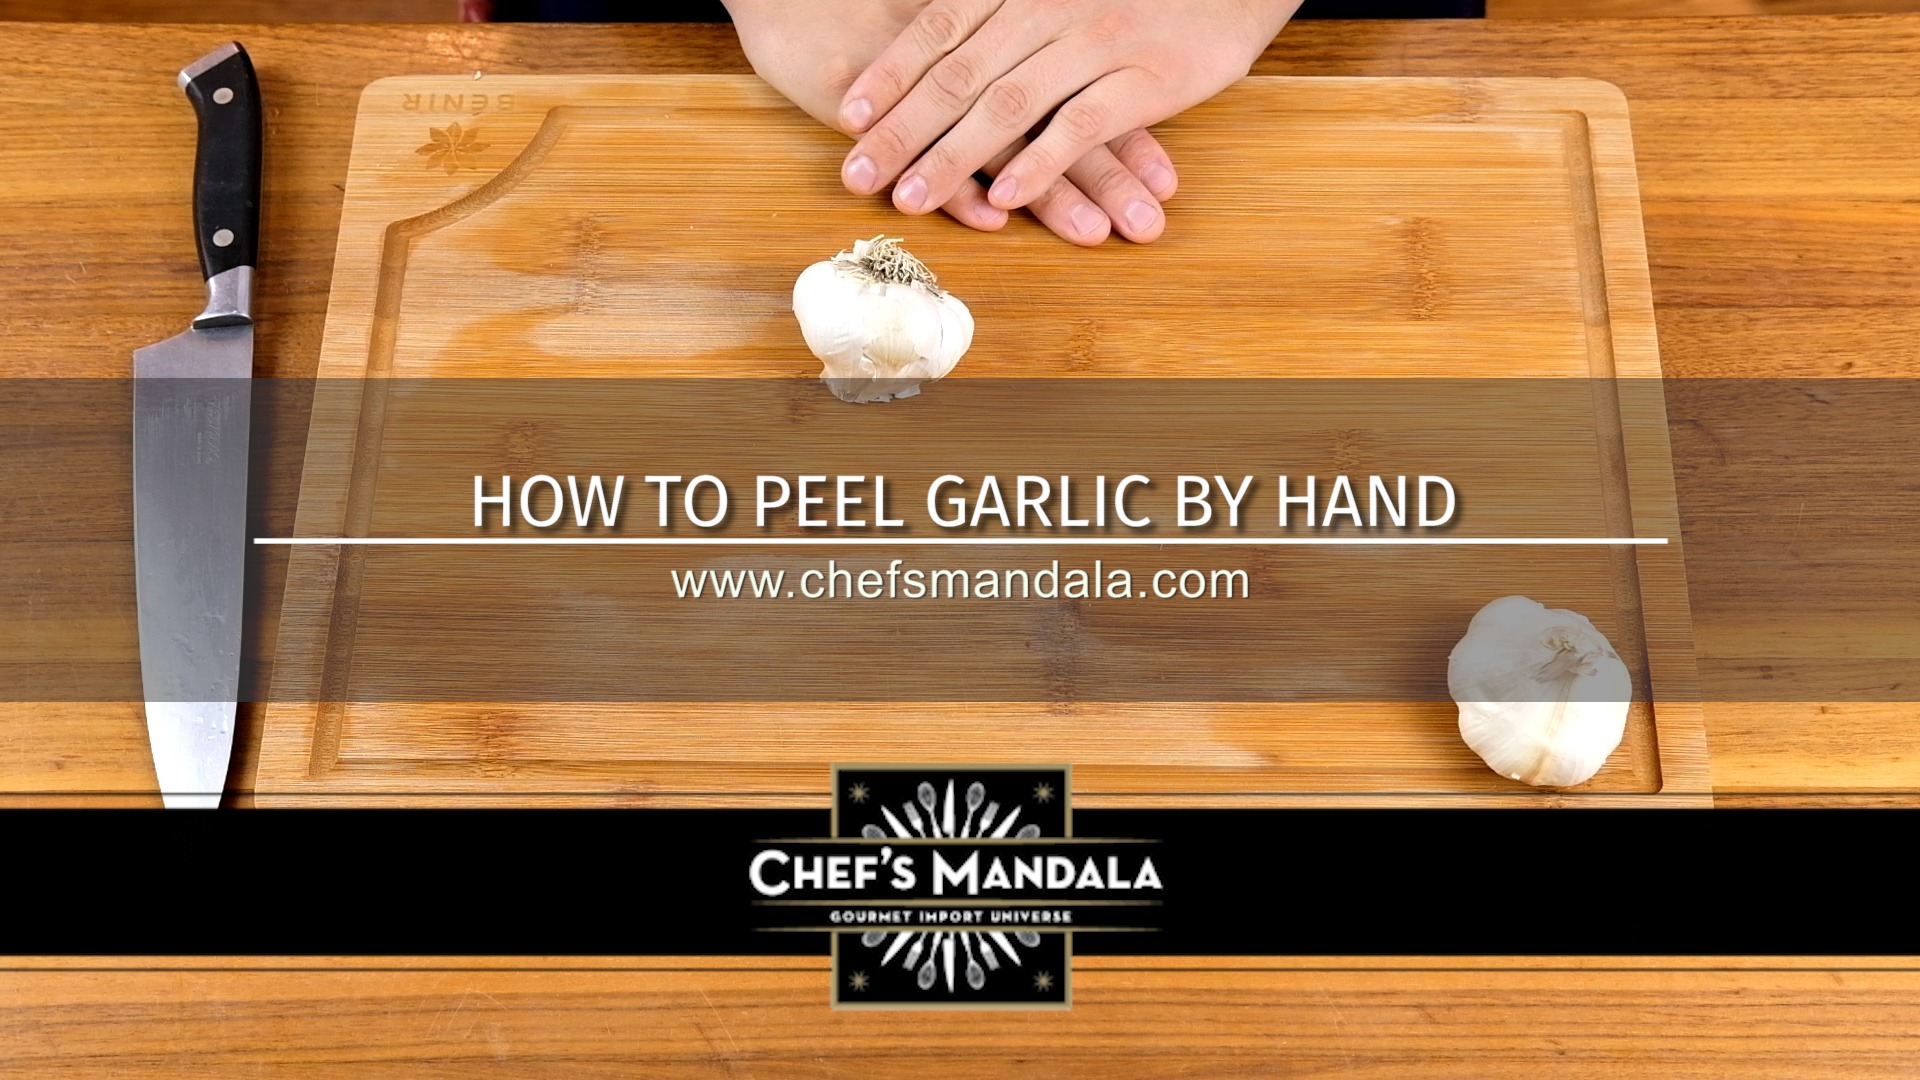 HOW TO PEEL GARLIC BY HAND